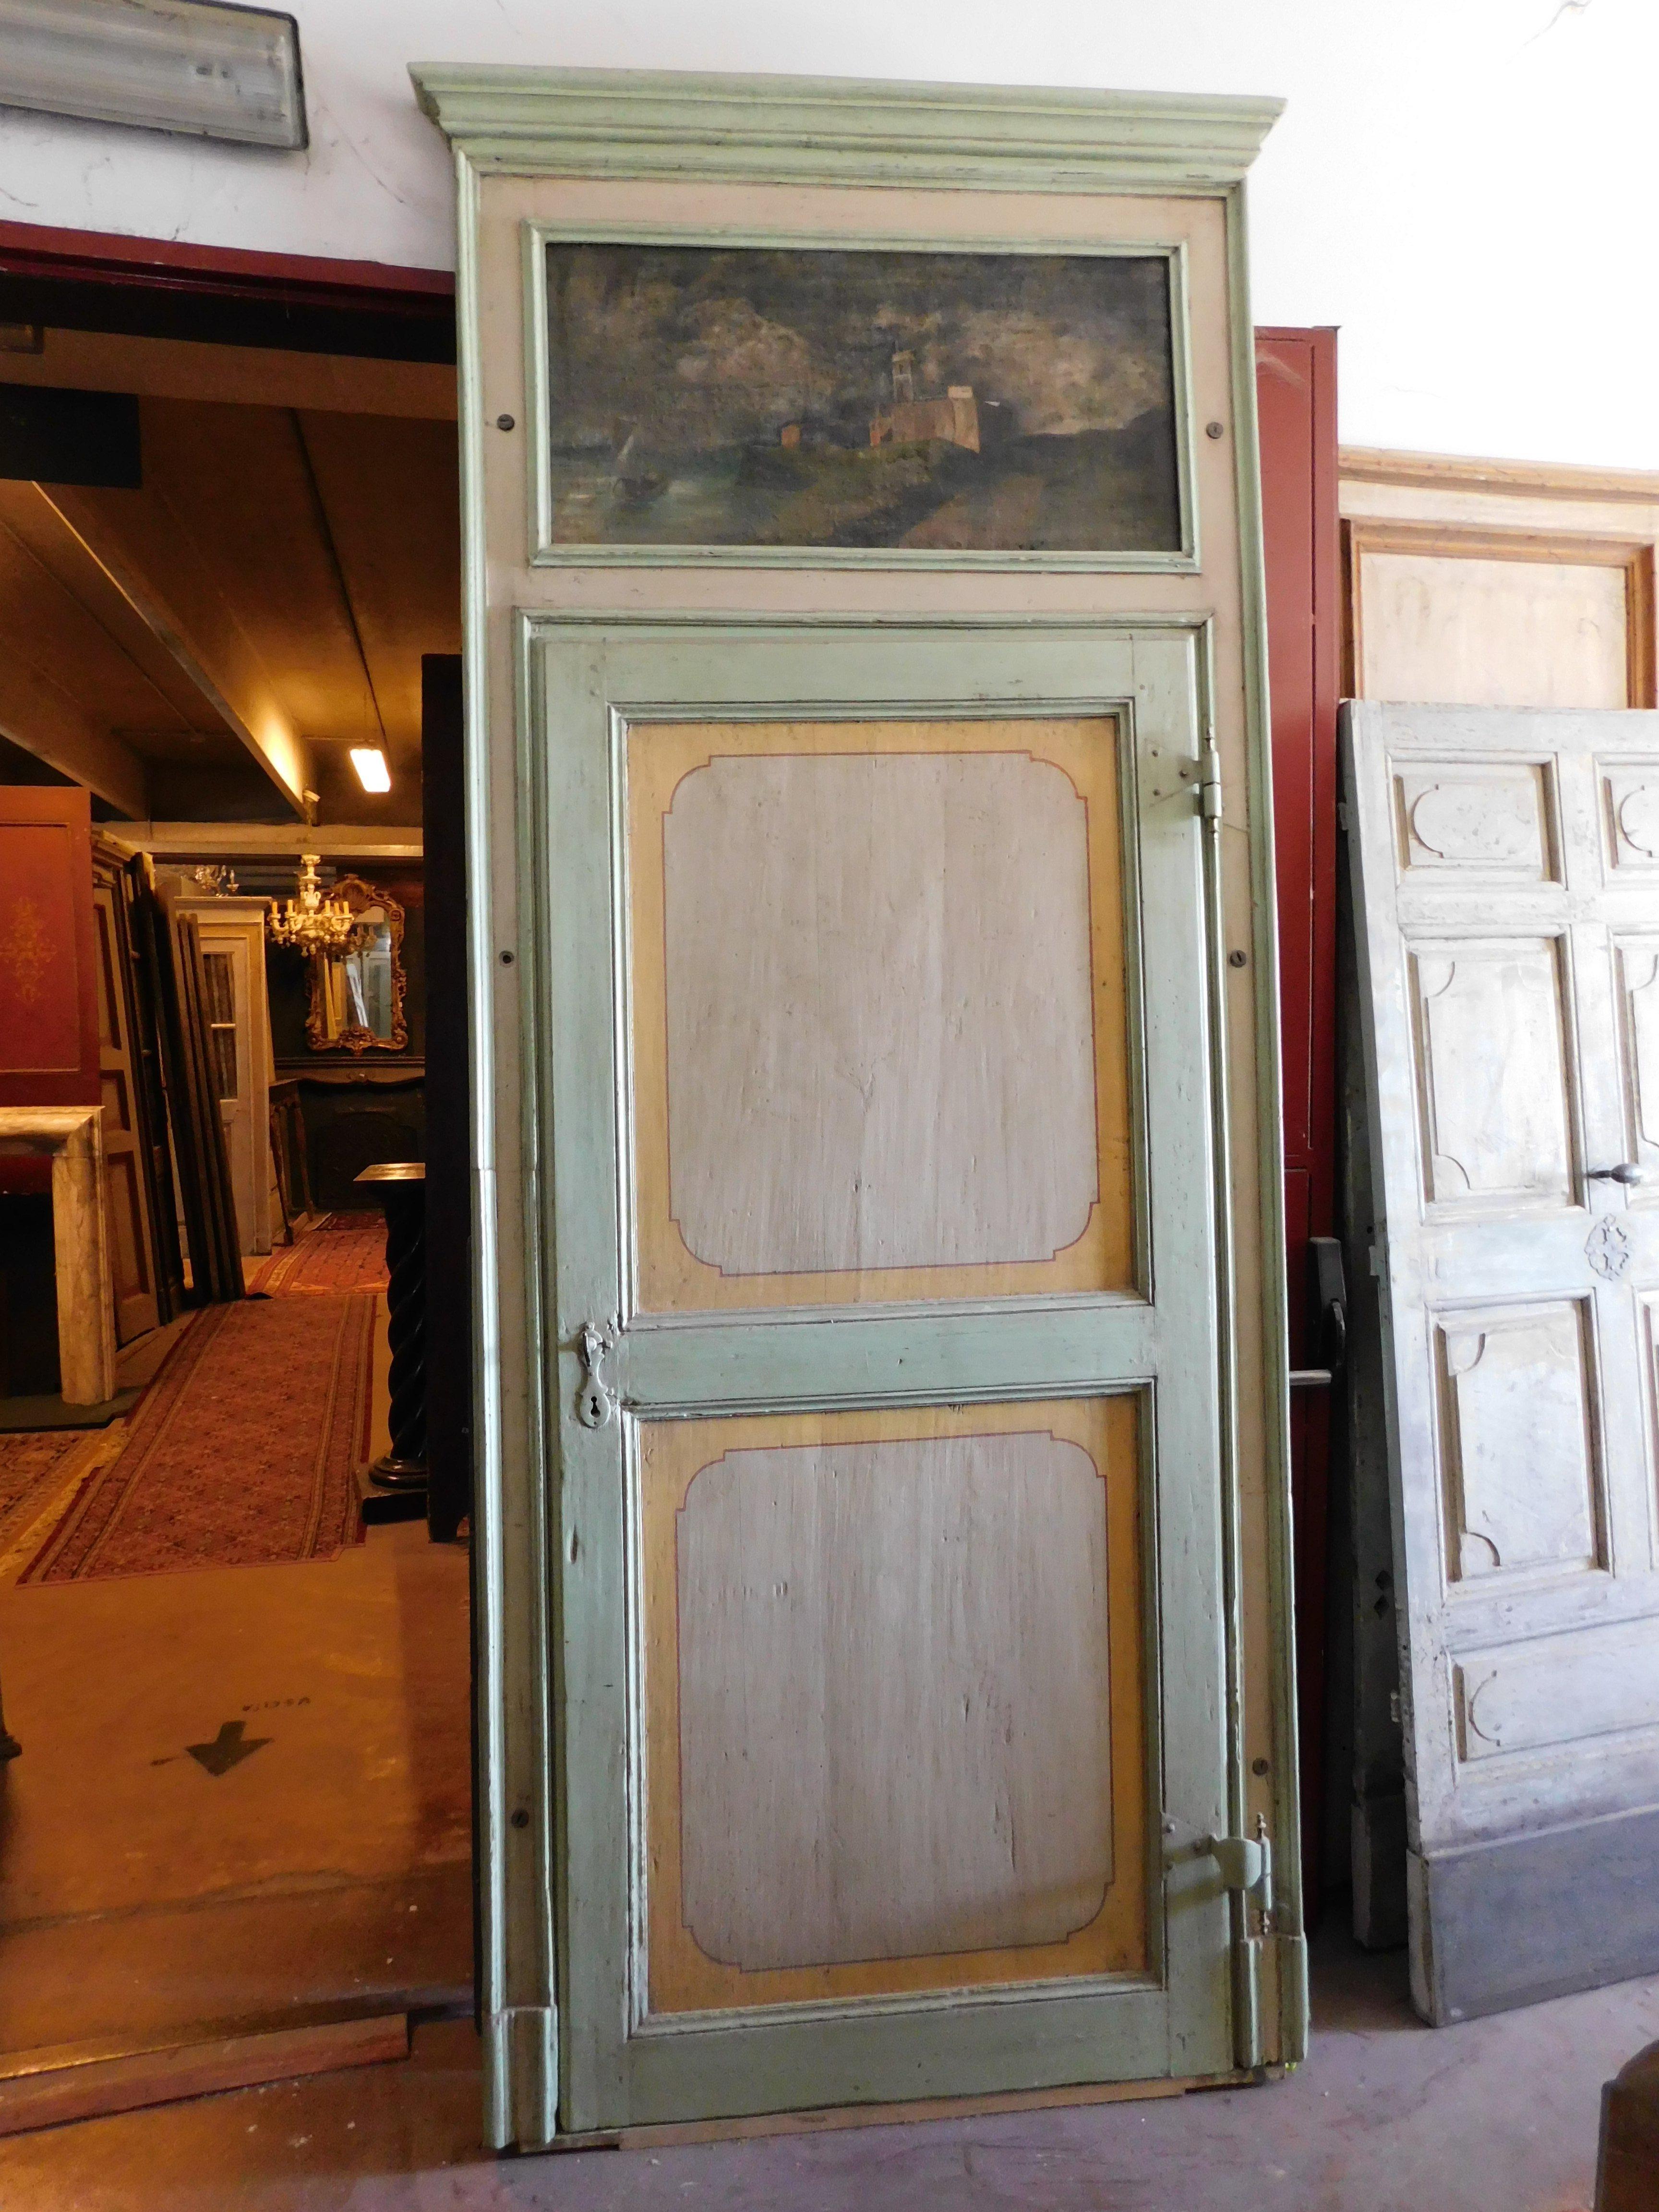 Antique single-leaf interior door, made of solid wood hand-painted in aqua green and yellow with beige, complete with original frame and overdoor painted on canvas with landscape, built for an important building with high ceilings in Italy, simple